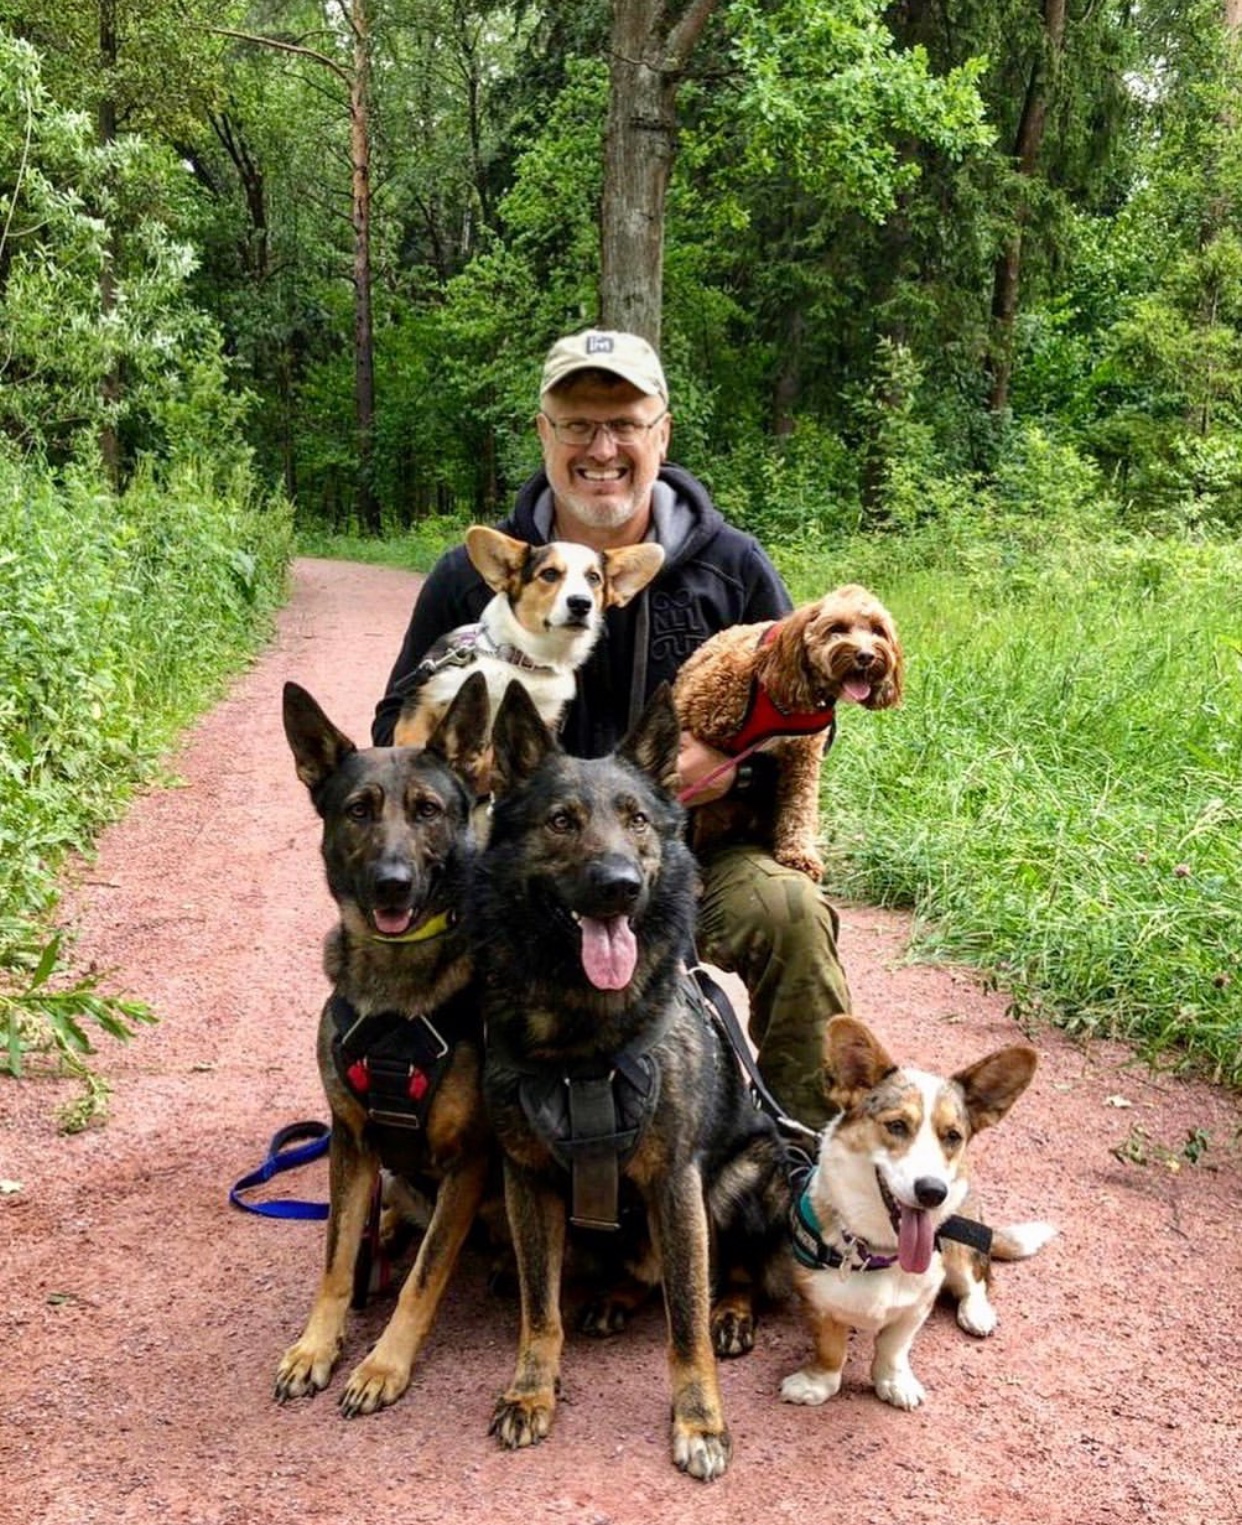 a man sitting behind his two German Shepherds, two Corgis, and pone poodle